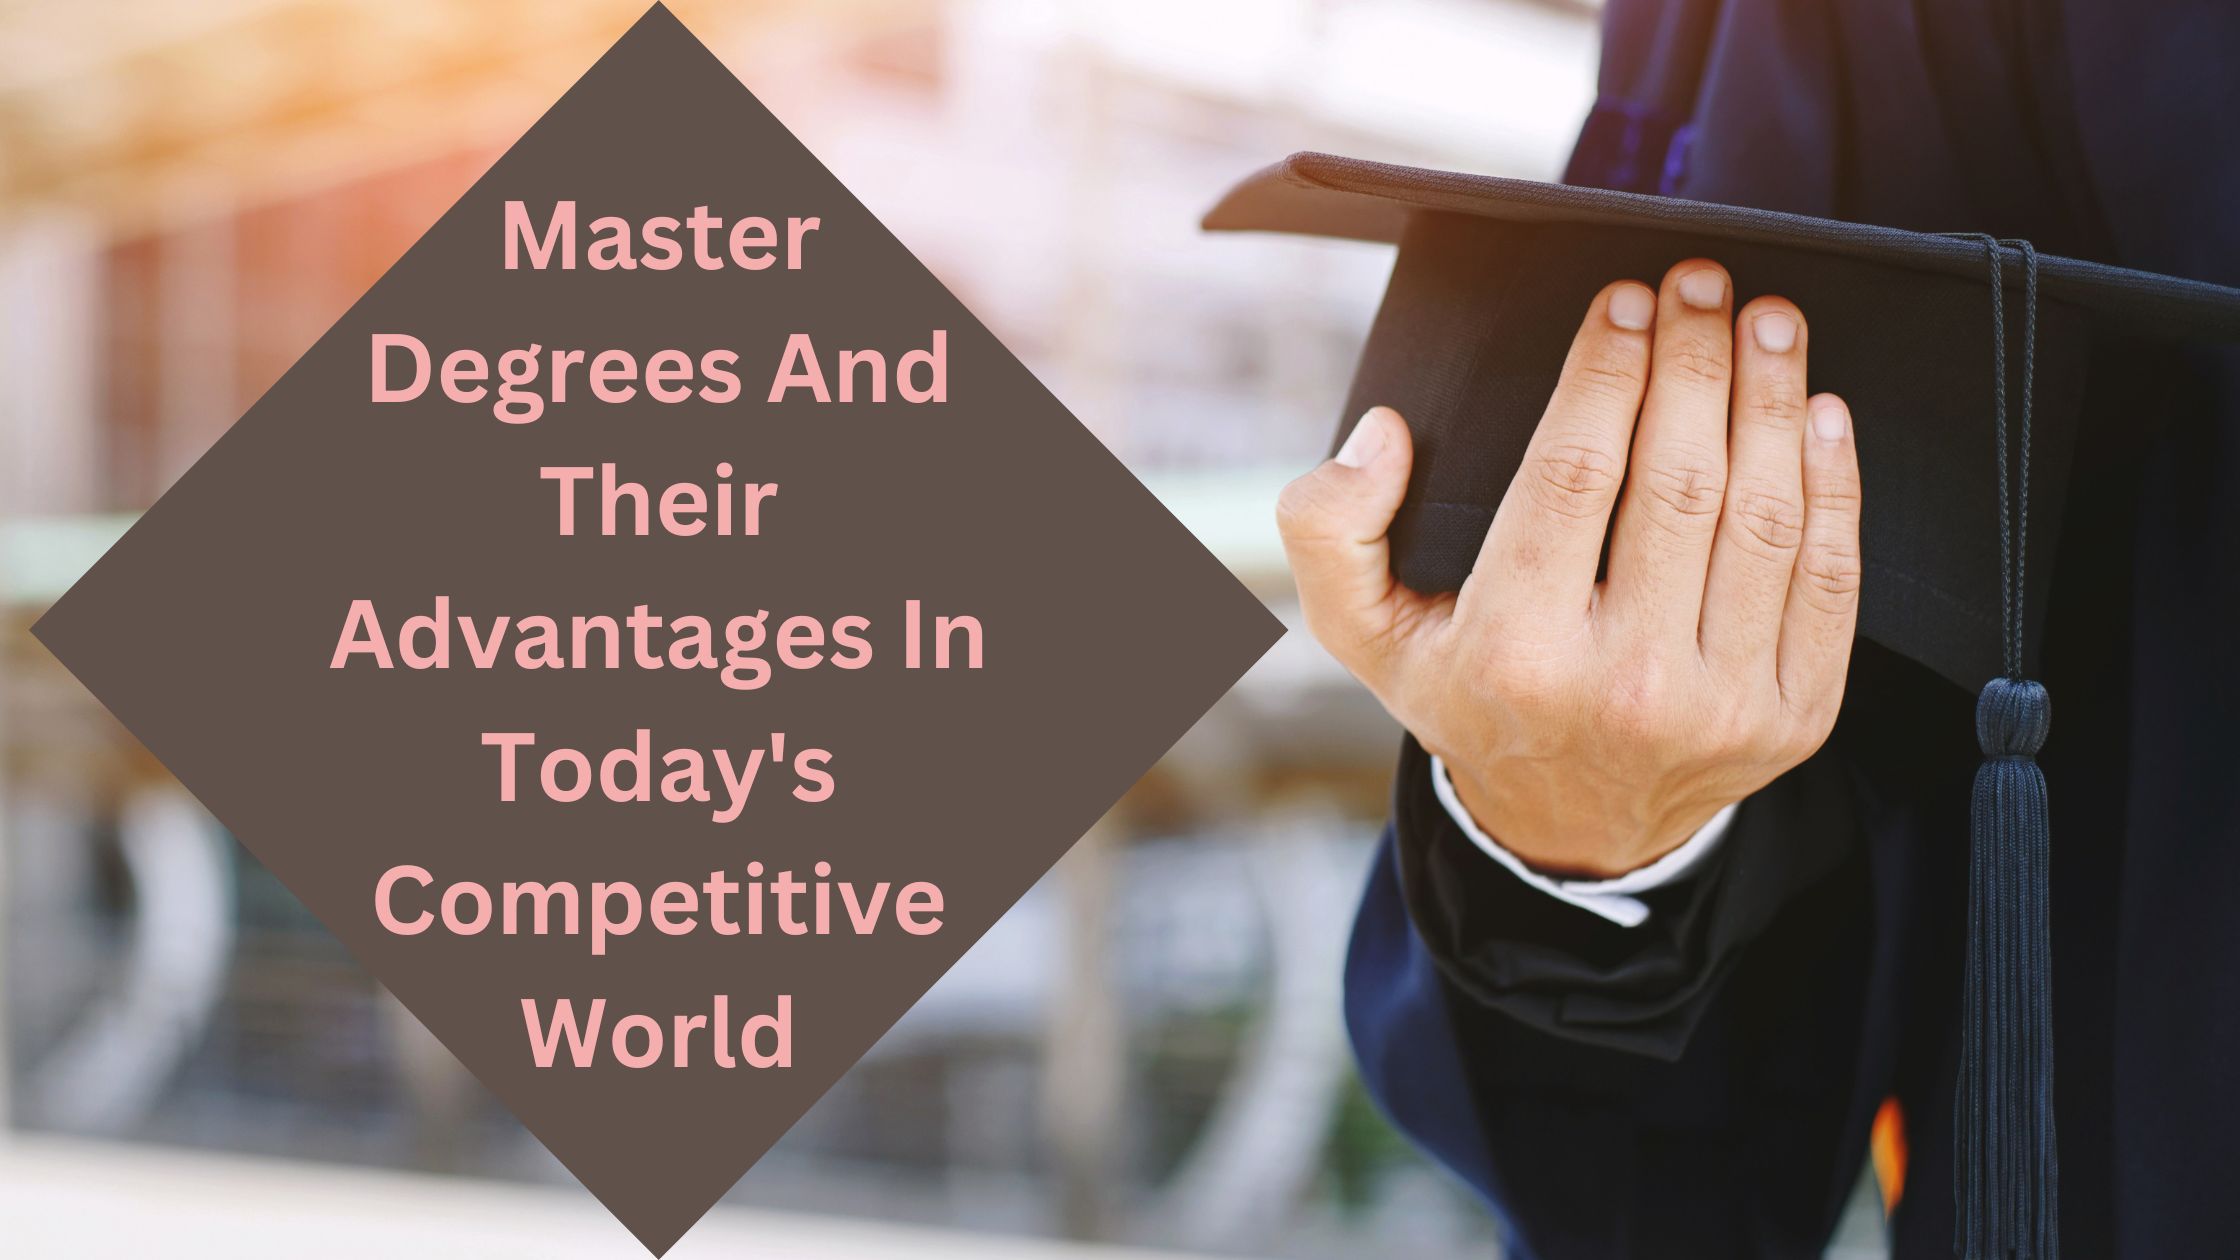 Master Degrees And Their Advantages In Today's Competitive World